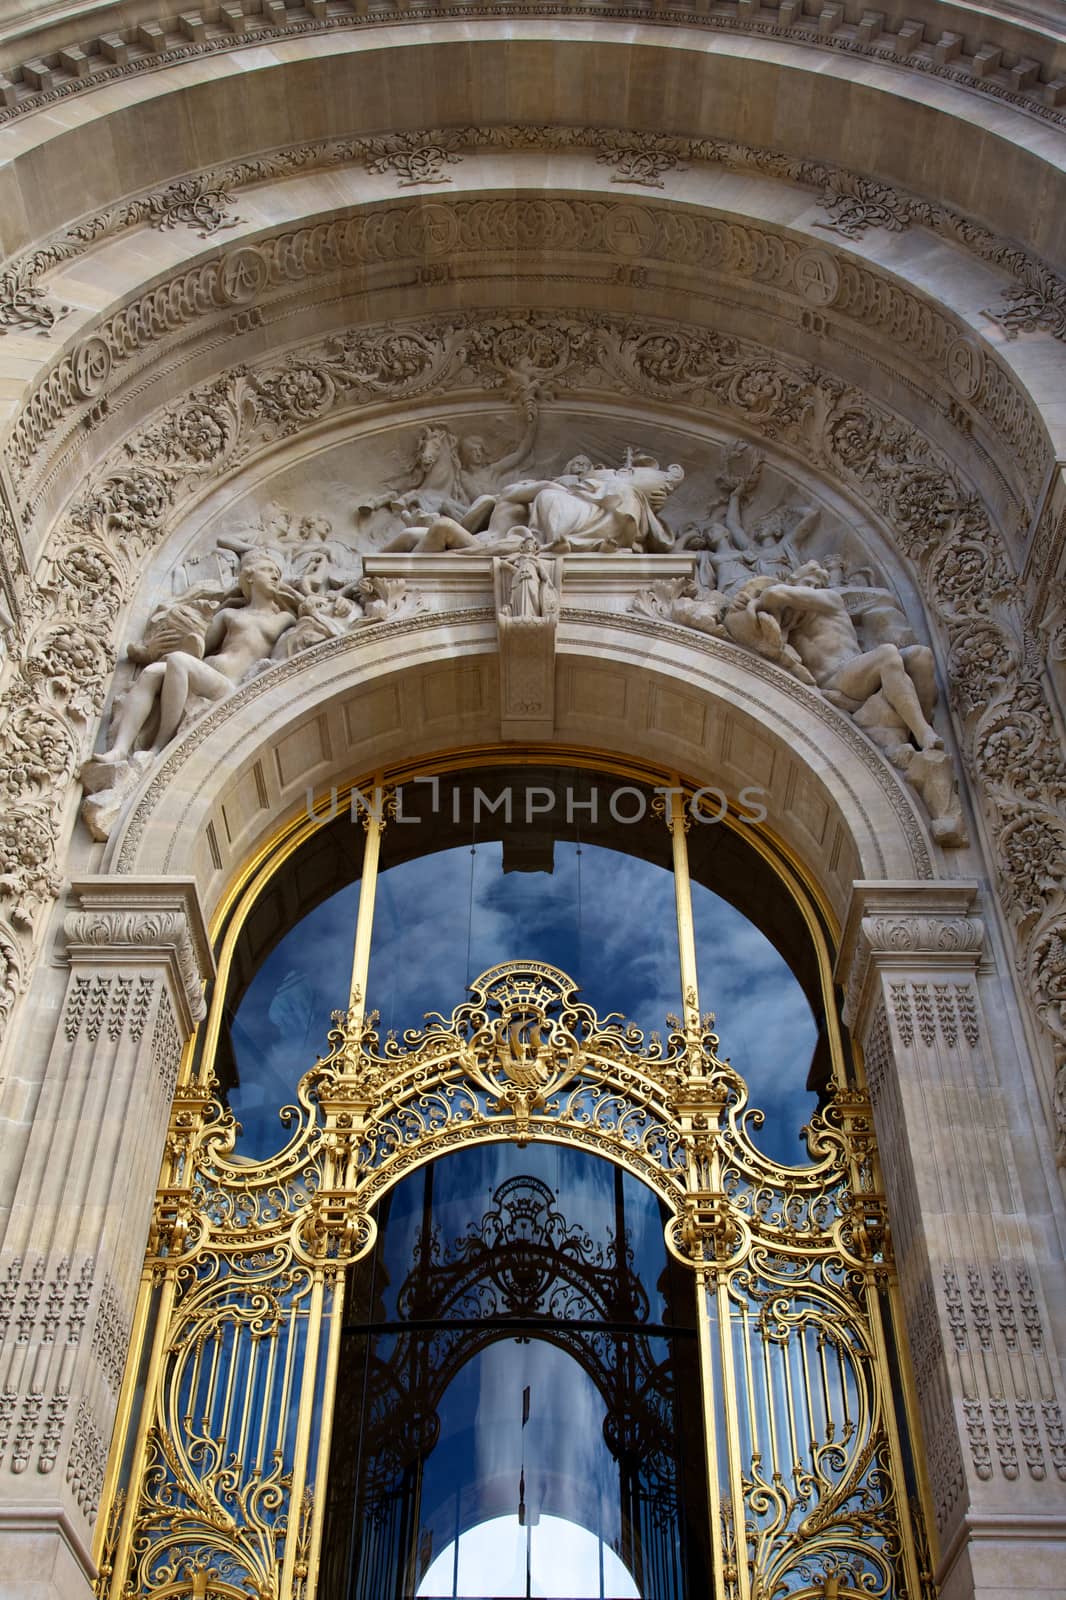 The Petit Palais (Small Palace) is a museum in Paris, France.